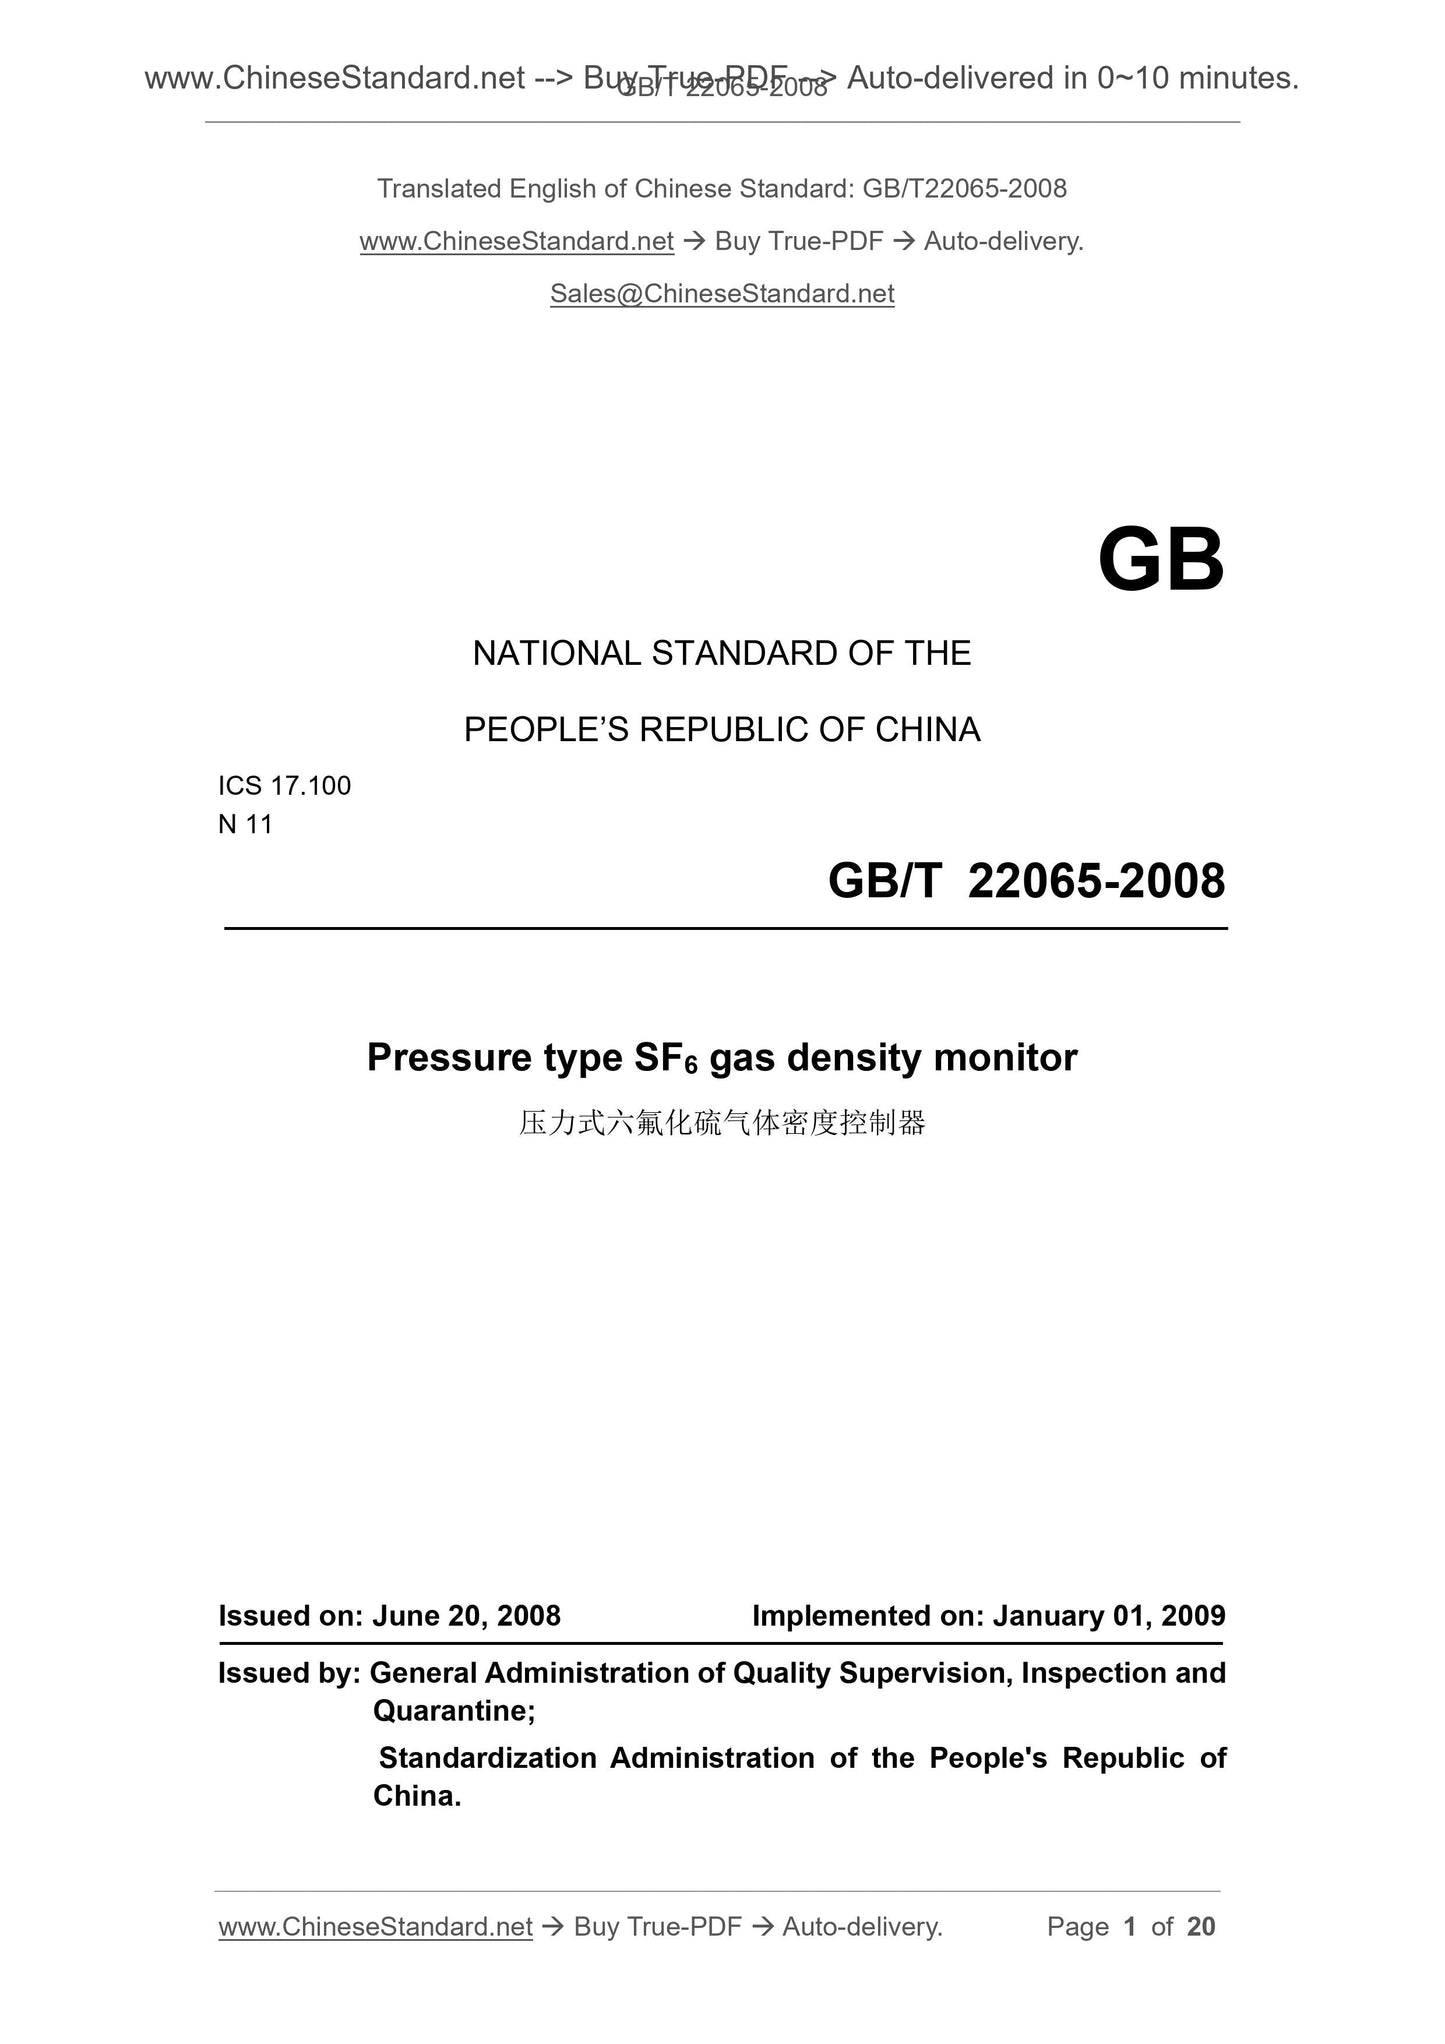 GB/T 22065-2008 Page 1